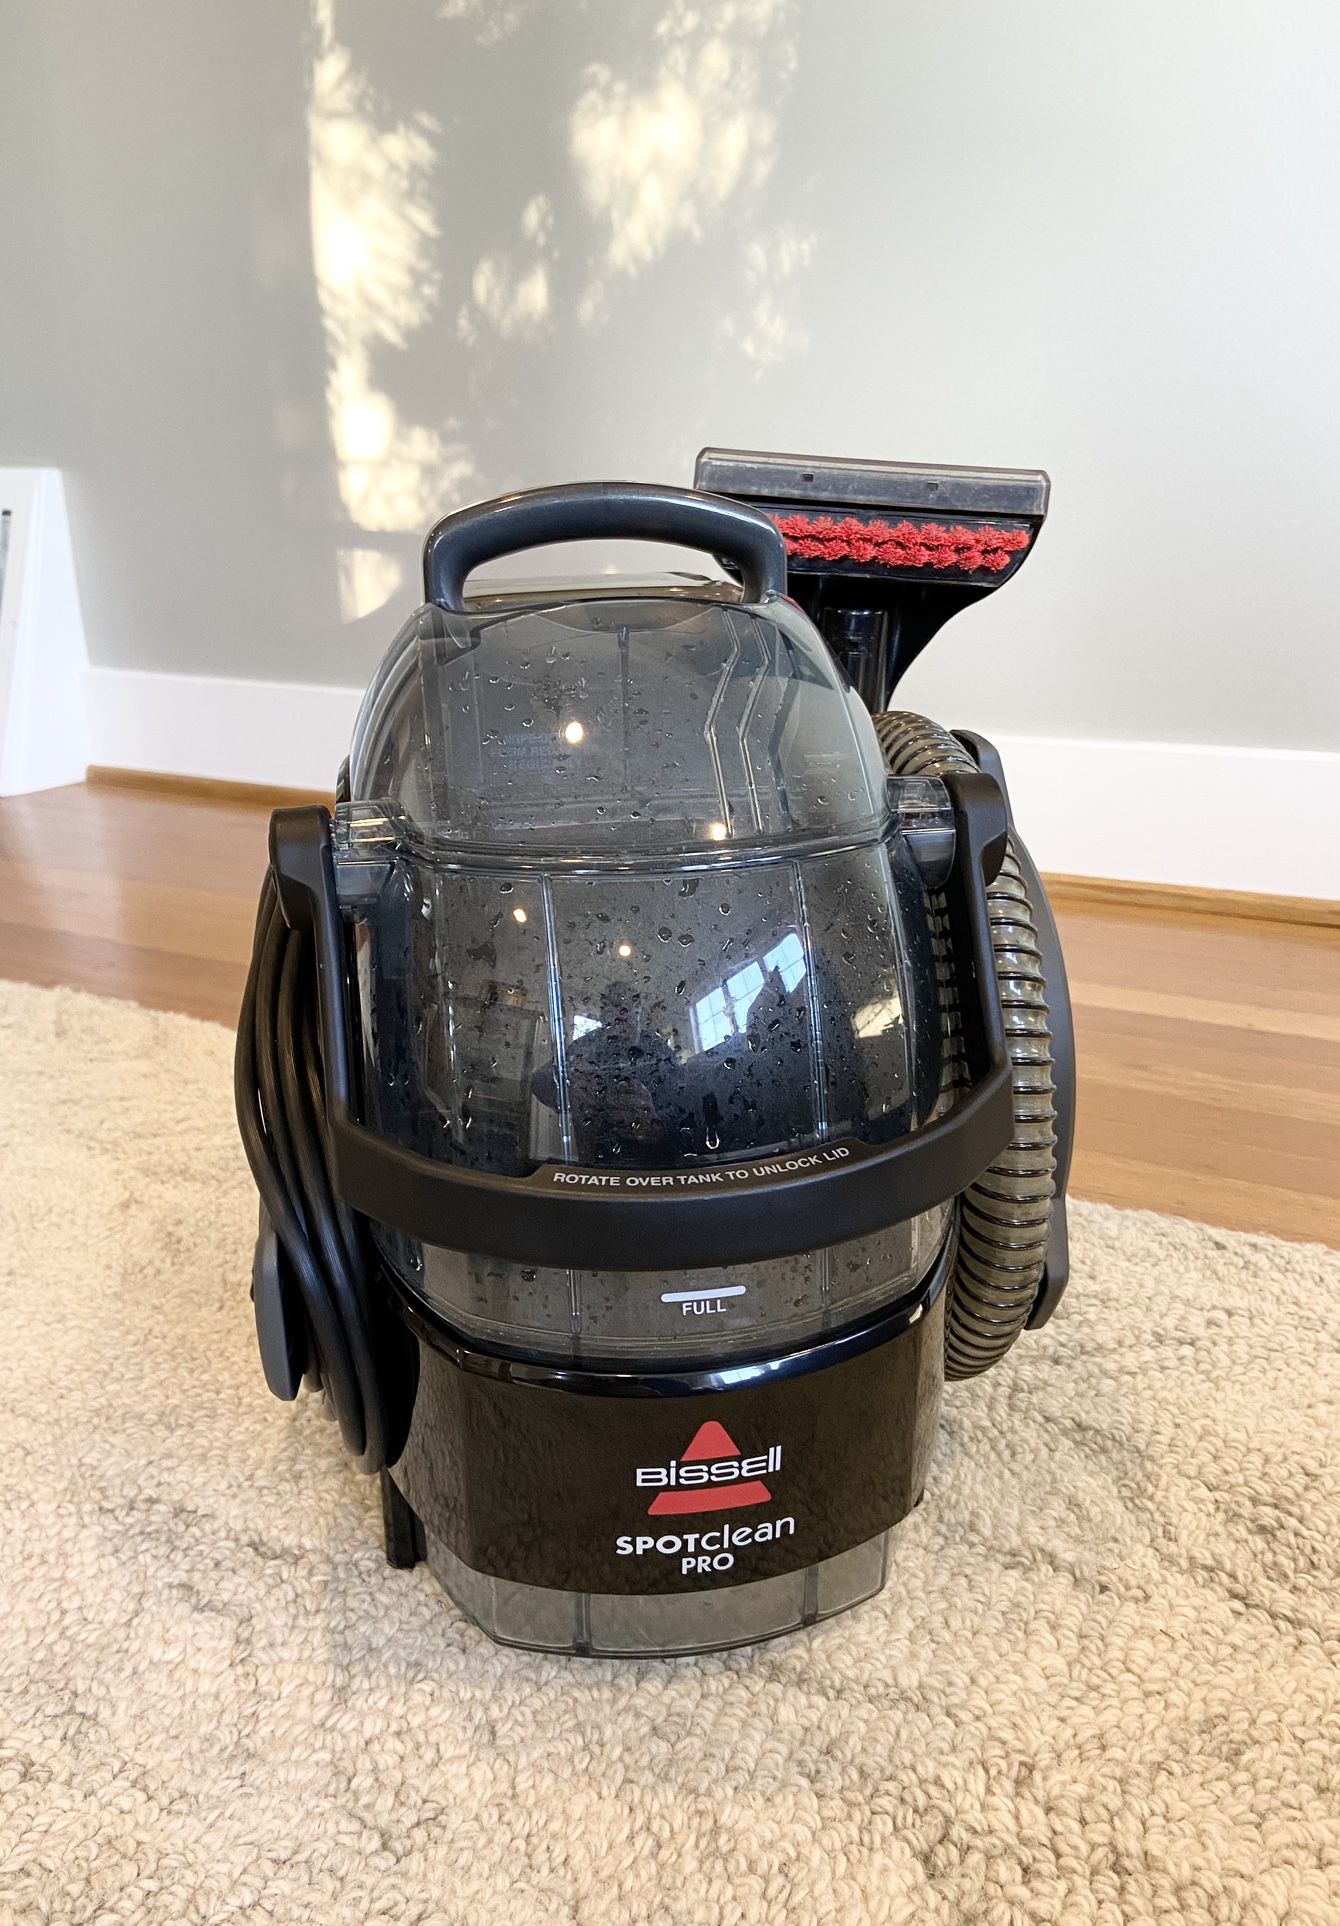 Bissell Spotclean Pro Portable Carpet Cleaner for Sale in Seattle, WA -  OfferUp